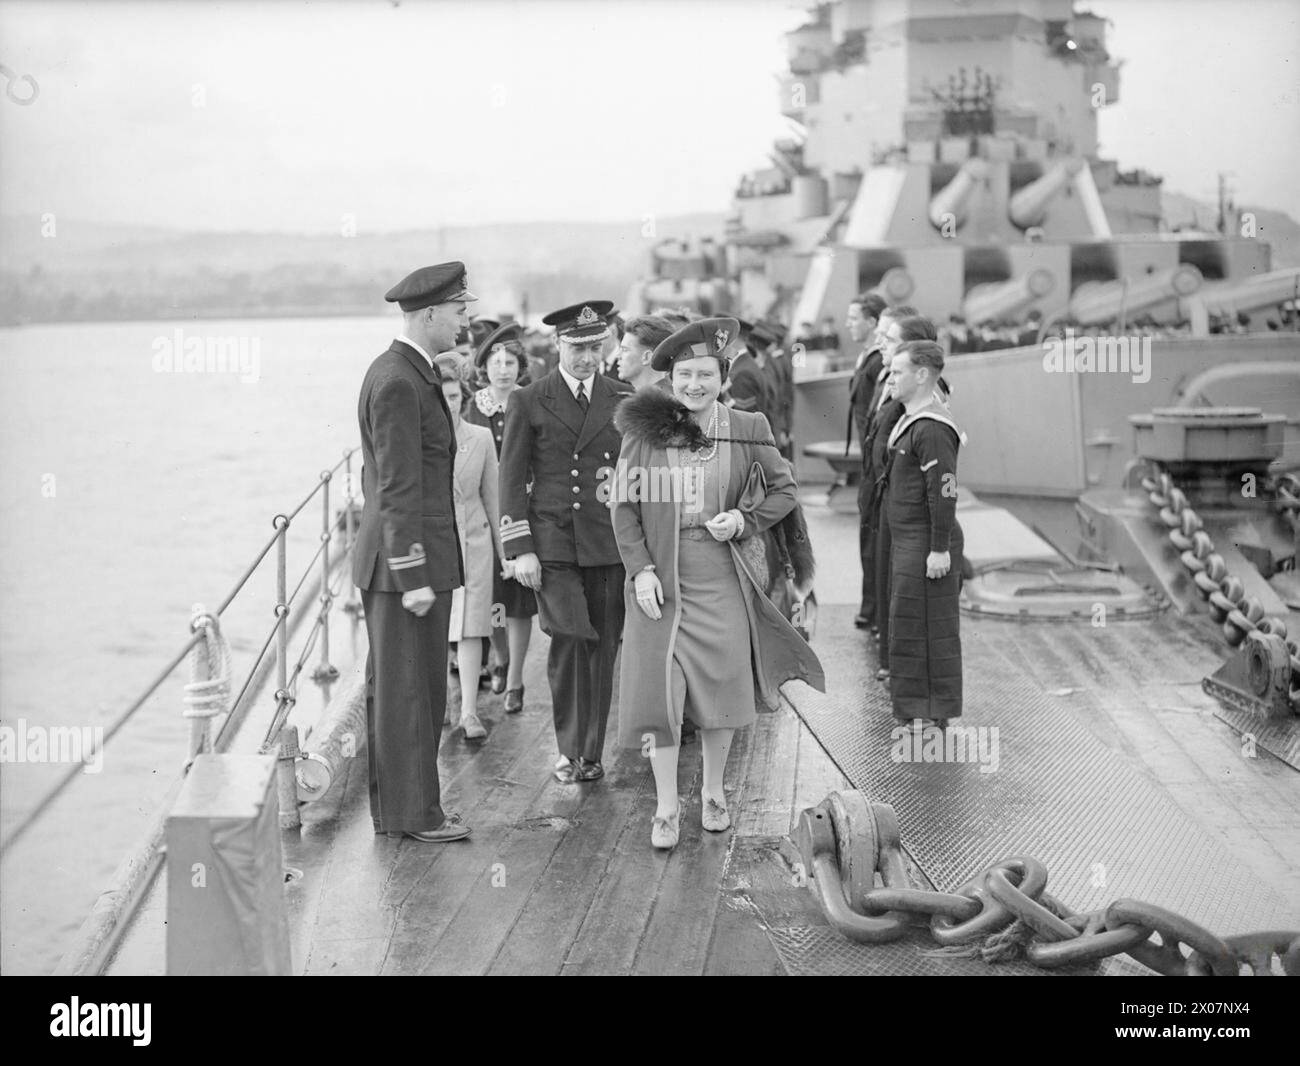 THE ROYAL NAVY DURING THE SECOND WORLD WAR - HM Queen Elizabeth walking along the focsle of HMS KING GEORGE V at Greenock followed by Princess Margaret and Princess Elizabeth during a farewell visit before the battleship left to join Britain's East Indies Fleet. The twin and quadruple 14 inch gun turrets can be seen in the background  Elizabeth, Queen, Elizabeth II, Queen, Margaret, Princess, Royal Navy, KING GEORGE V (HMS) Stock Photo